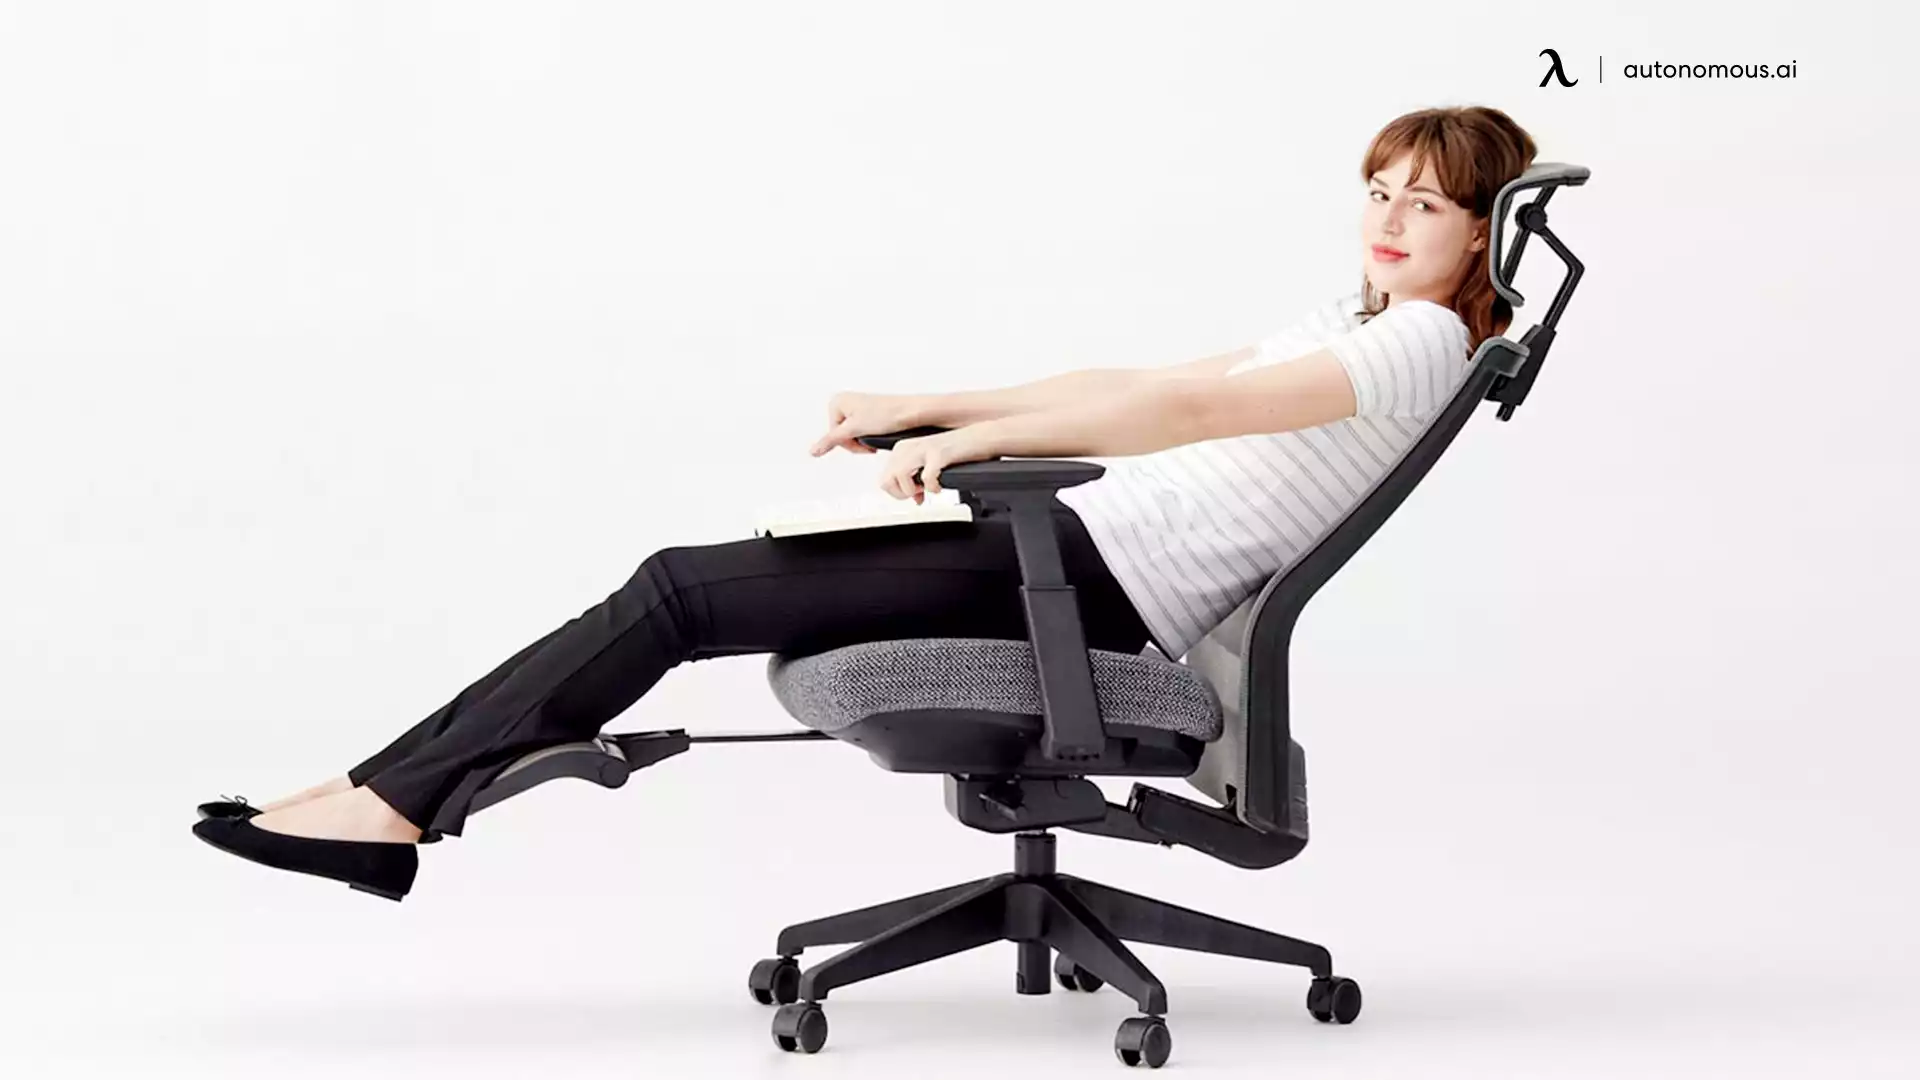 Invest In Ergonomic Equipment to Prevent Lower Back Pain at Work